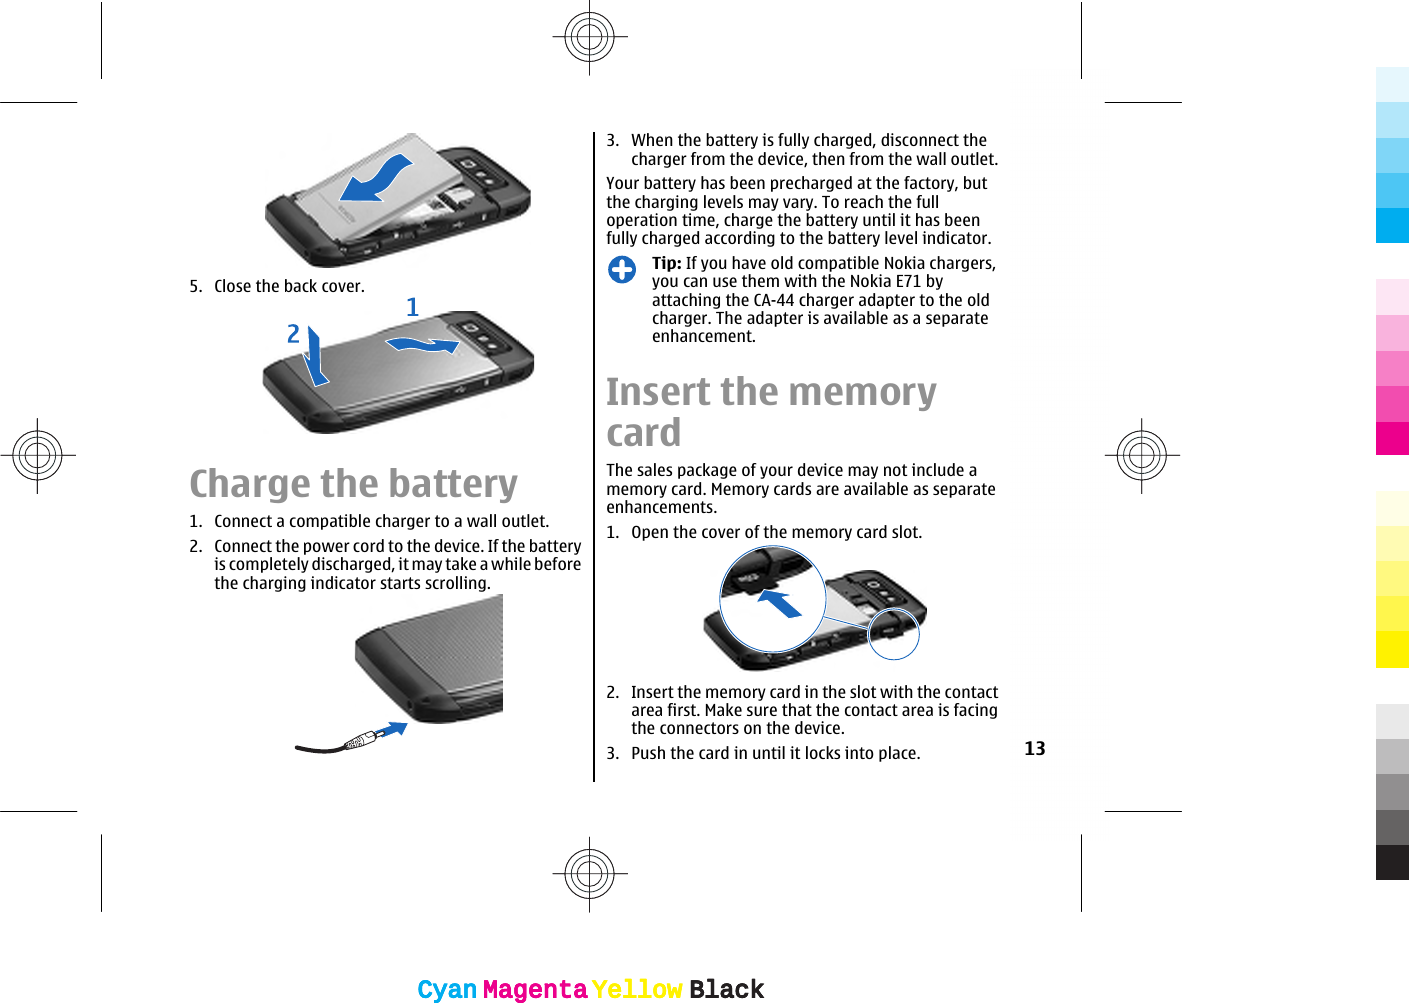 5. Close the back cover.Charge the battery1. Connect a compatible charger to a wall outlet.2. Connect the power cord to the device. If the batteryis completely discharged, it may take a while beforethe charging indicator starts scrolling.3. When the battery is fully charged, disconnect thecharger from the device, then from the wall outlet.Your battery has been precharged at the factory, butthe charging levels may vary. To reach the fulloperation time, charge the battery until it has beenfully charged according to the battery level indicator.Tip: If you have old compatible Nokia chargers,you can use them with the Nokia E71 byattaching the CA-44 charger adapter to the oldcharger. The adapter is available as a separateenhancement.Insert the memorycardThe sales package of your device may not include amemory card. Memory cards are available as separateenhancements.1. Open the cover of the memory card slot.2. Insert the memory card in the slot with the contactarea first. Make sure that the contact area is facingthe connectors on the device.3. Push the card in until it locks into place. 13CyanCyanMagentaMagentaYellowYellowBlackBlackCyanCyanMagentaMagentaYellowYellowBlackBlack